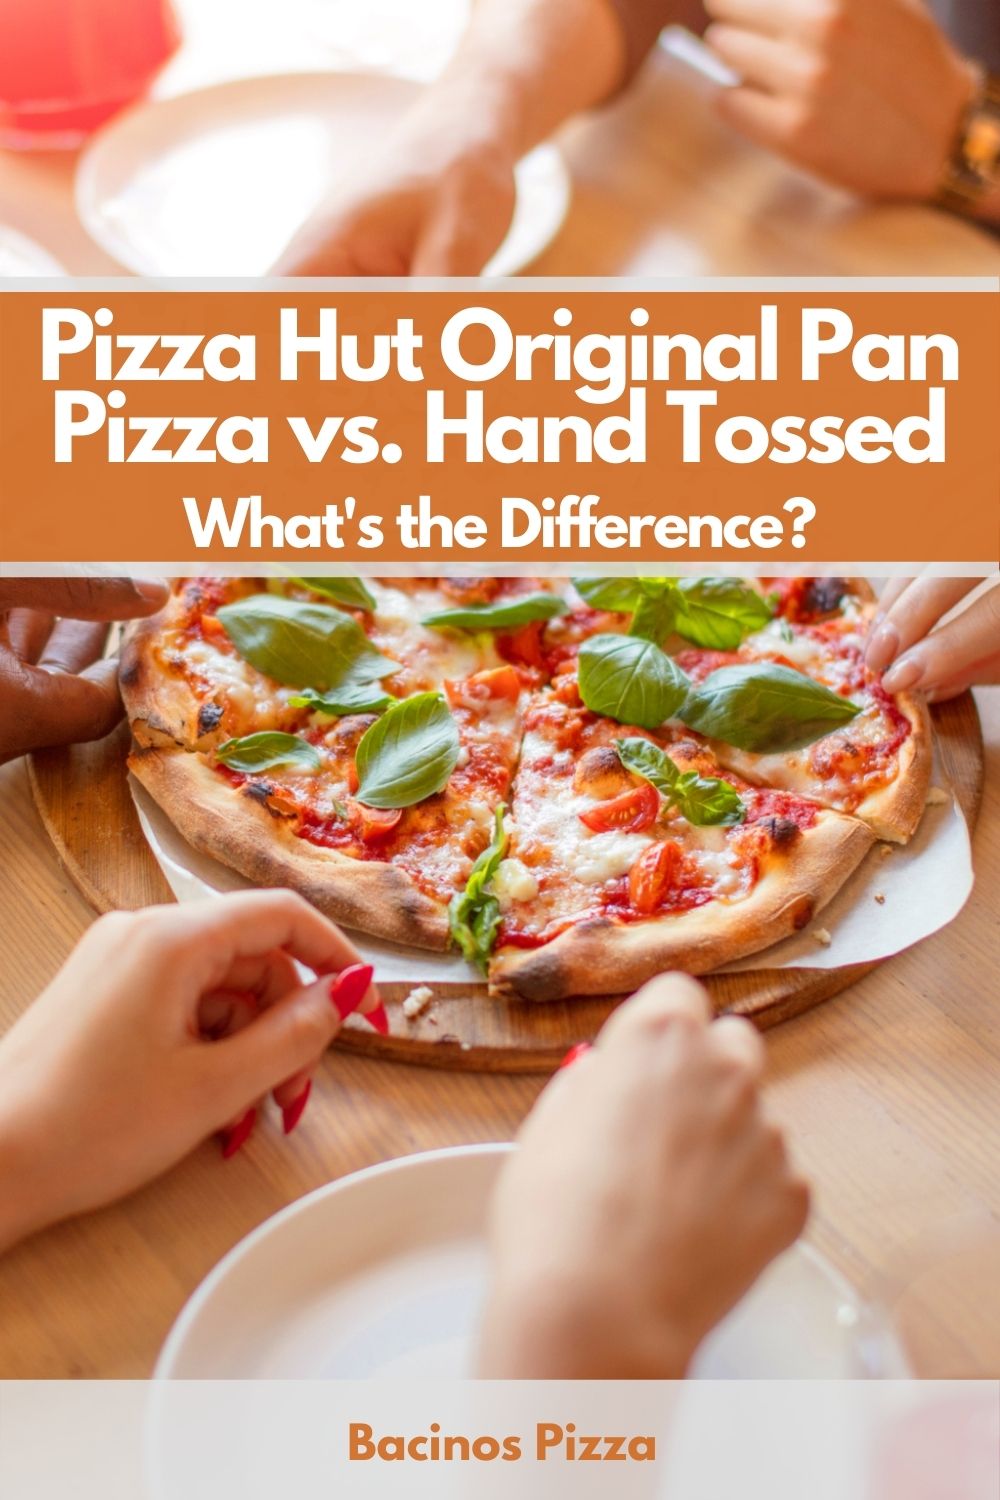 Pizza Hut Original Pan Pizza vs. Hand Tossed What's the Difference pin